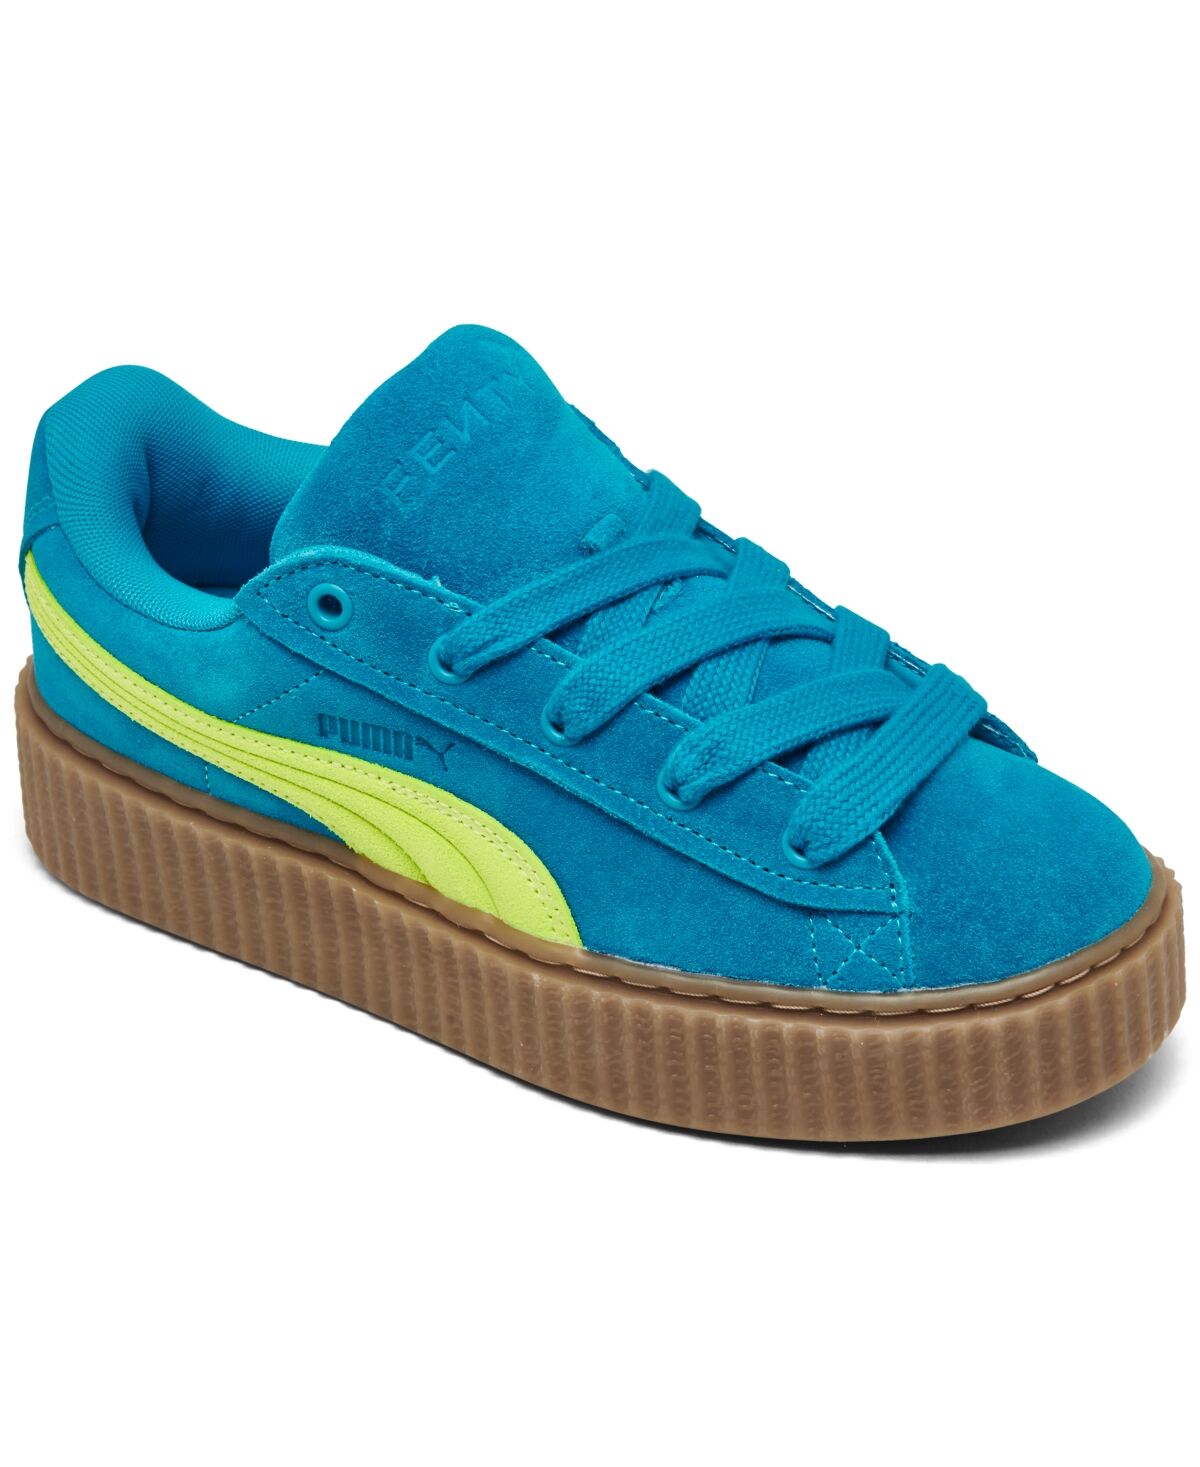 Puma Women's Fenty Creeper Phatty Casual Sneakers from Finish Line - Speed Blue, Lime Pow, Gum